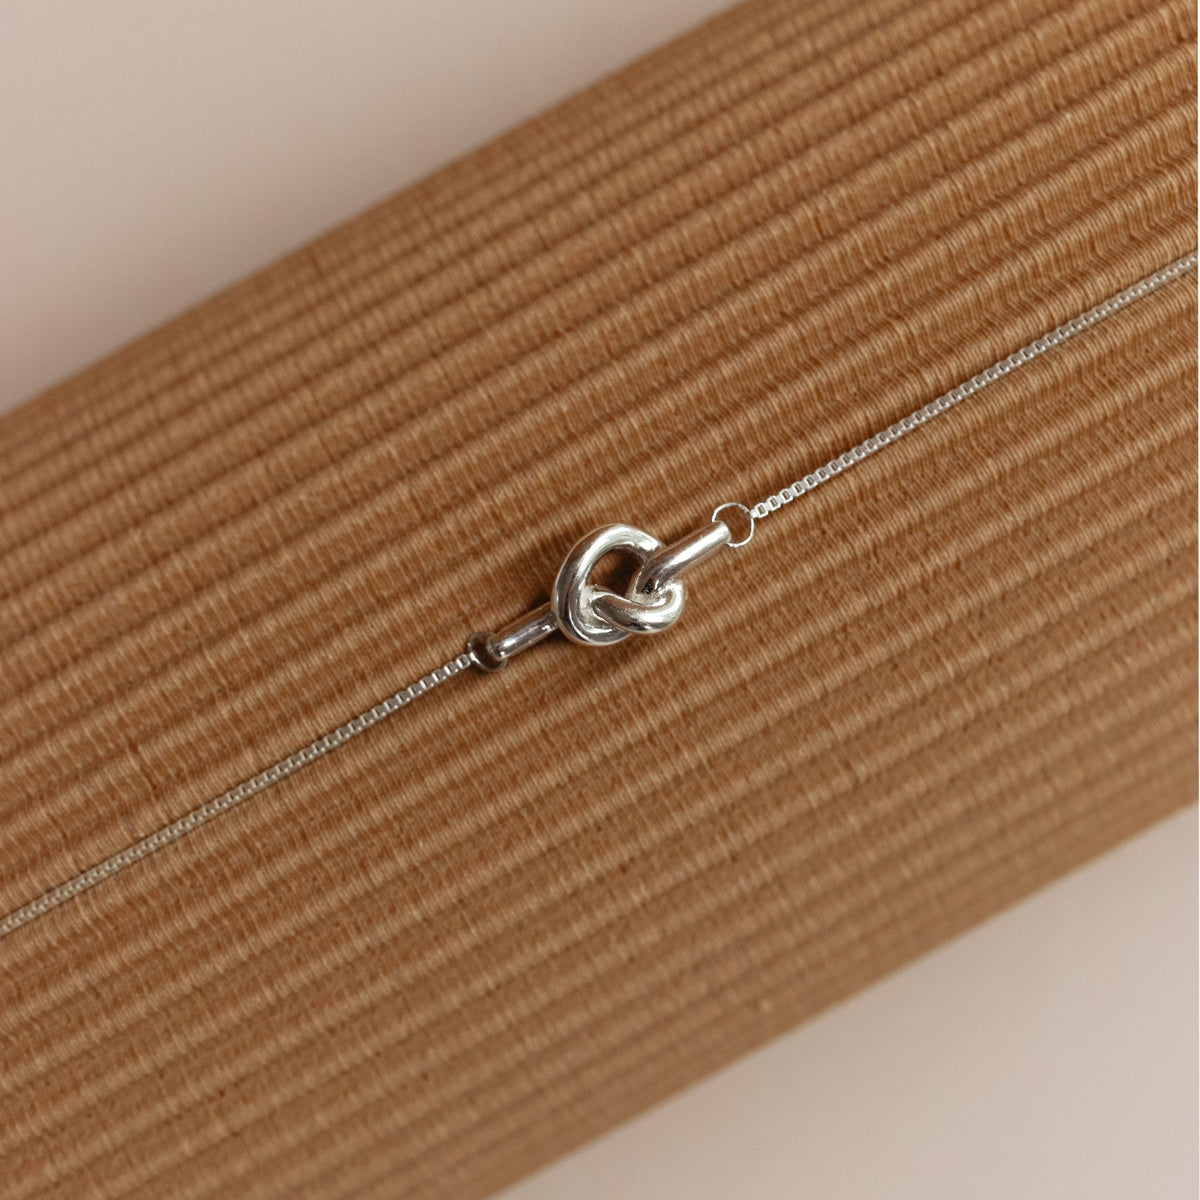 POISE OFFSET KNOT NECKLACE - SILVER - SO PRETTY CARA COTTER